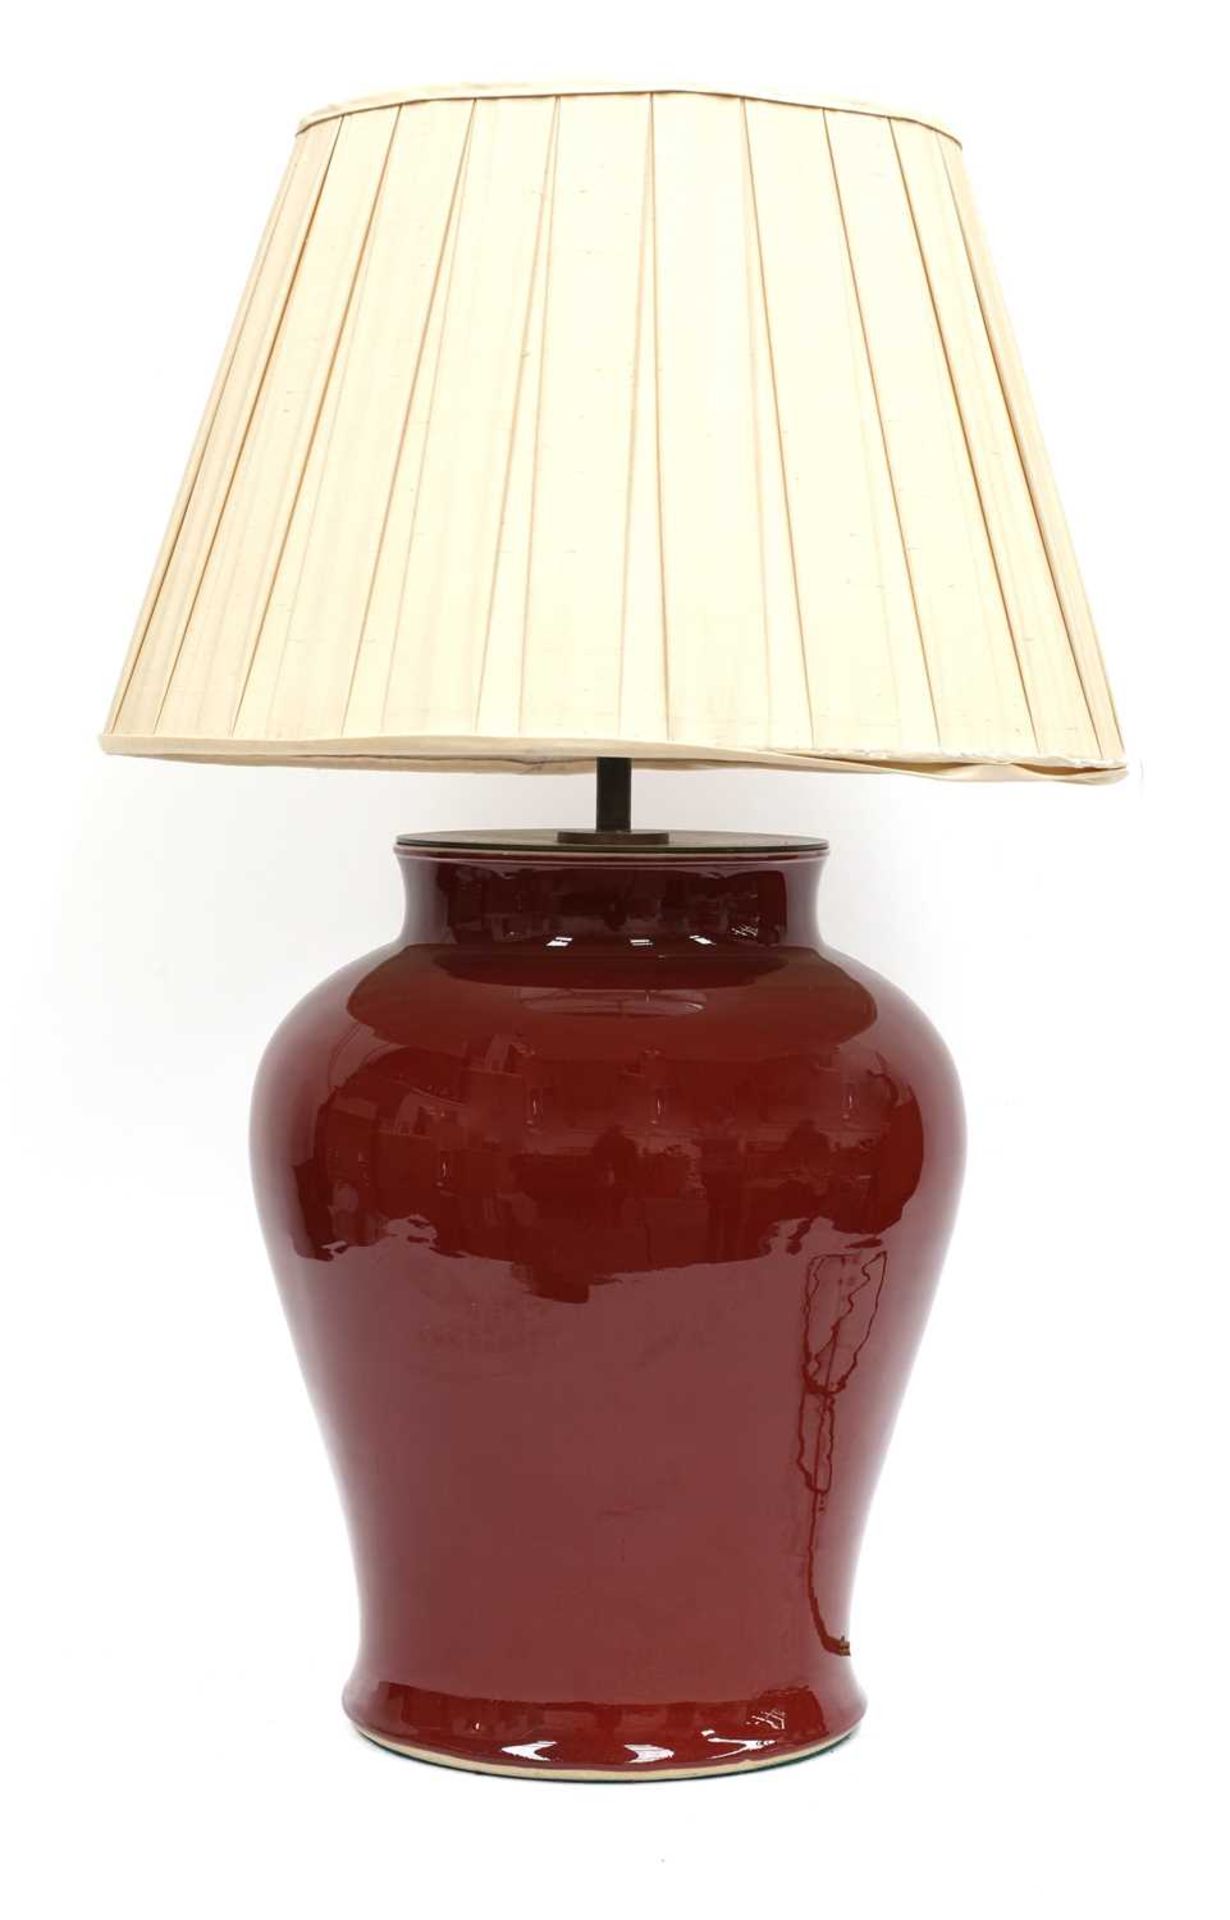 A large Chinese-style red-glazed porcelain table lamp, - Image 2 of 2